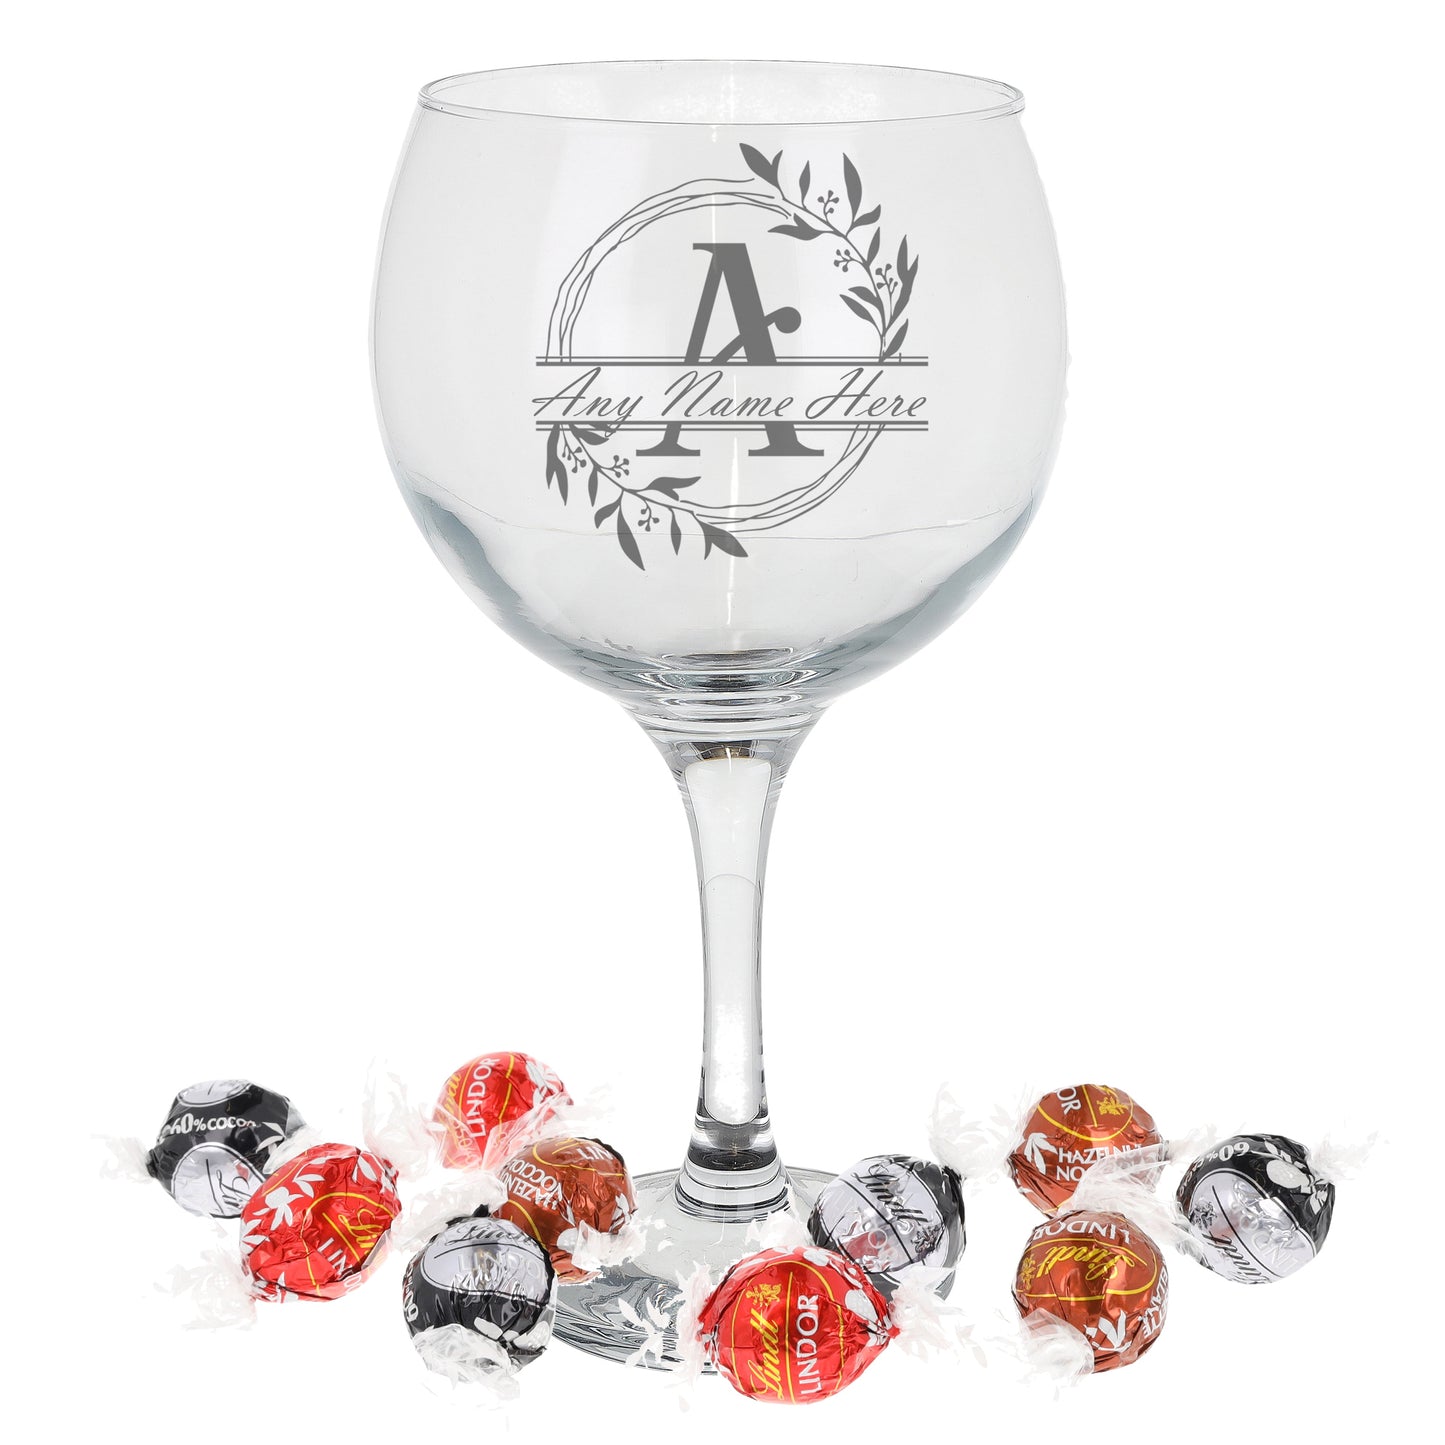 Personalised Engraved Initial Monogram Gin Glass Gift  - Always Looking Good - Filled- Lindt Chocolates  